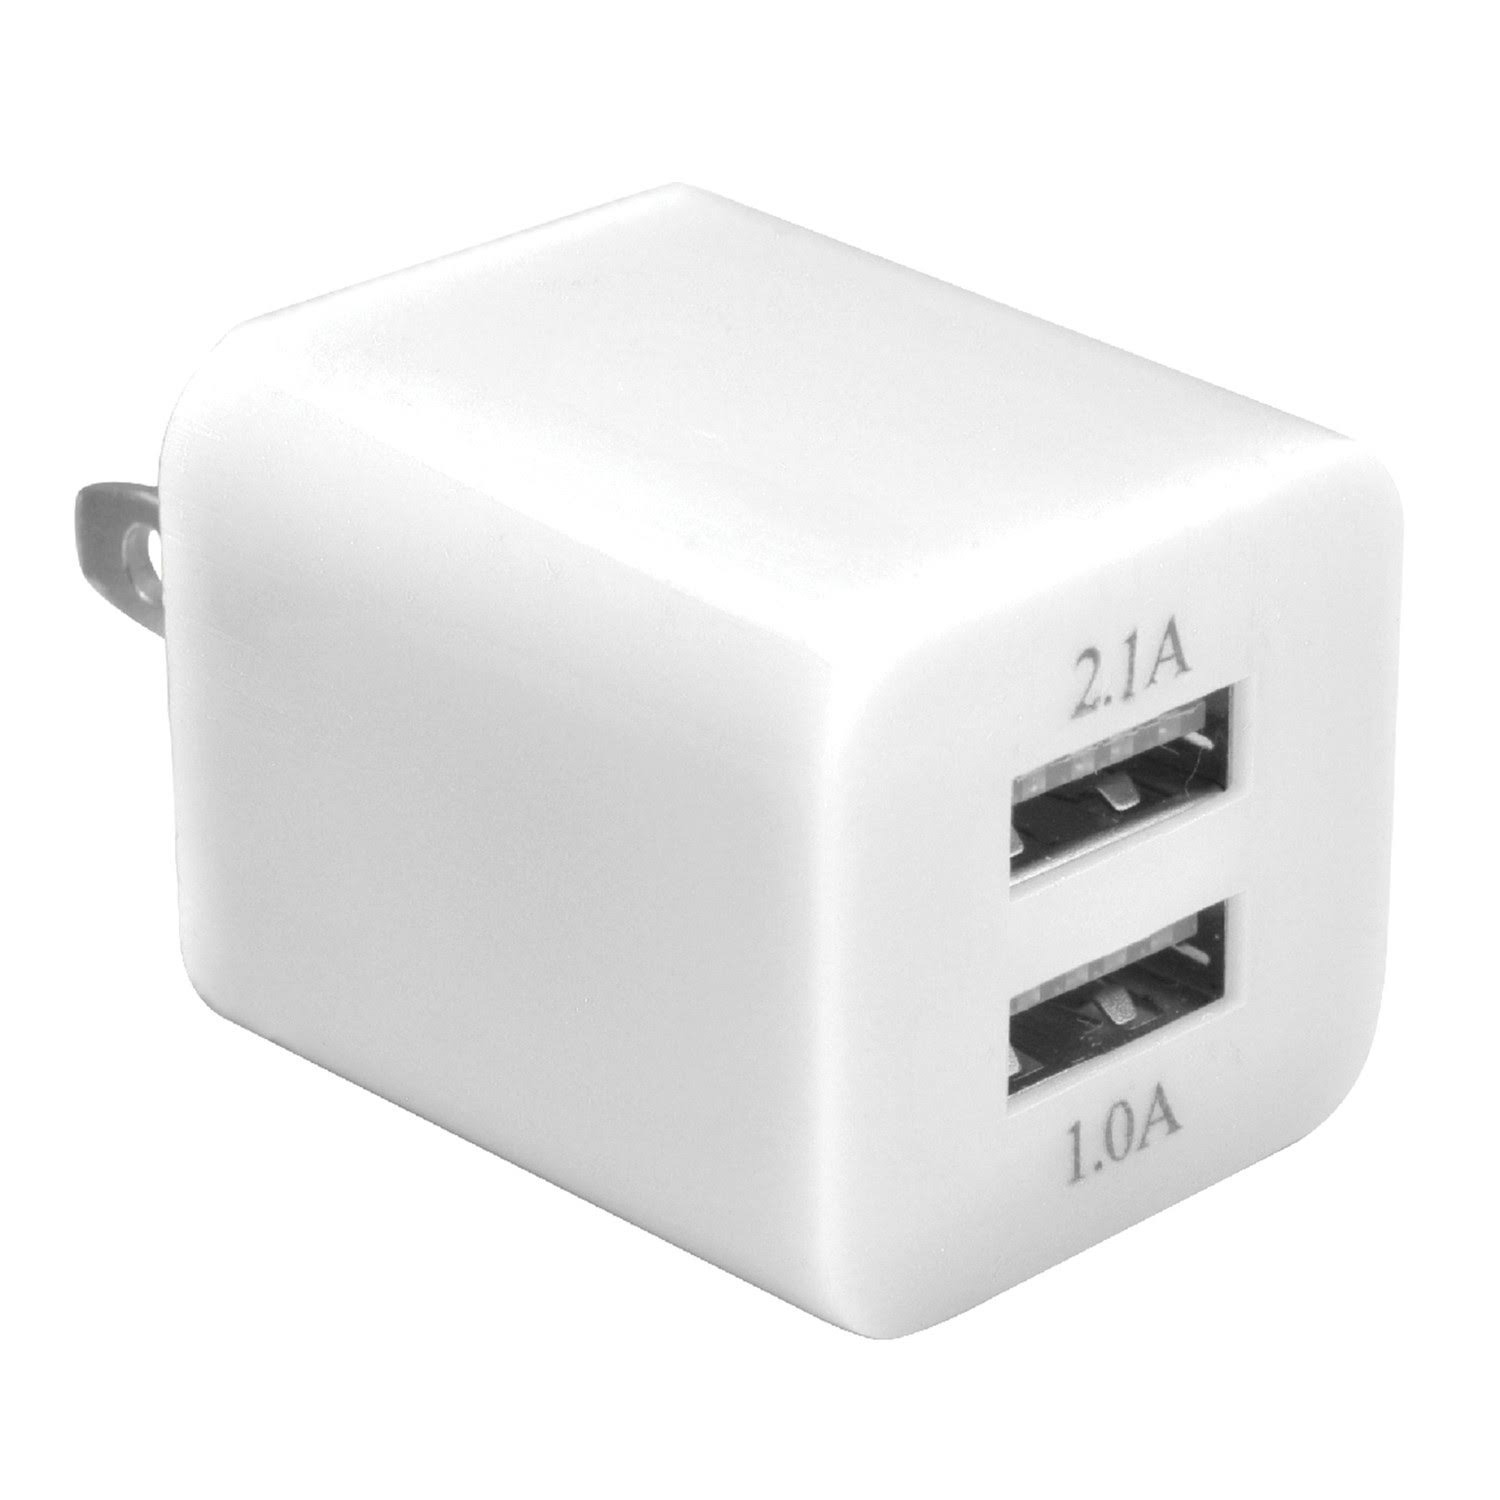 Ematic ECW06WH 2.1-Amp 2-Port USB-A Wall Charger (White)